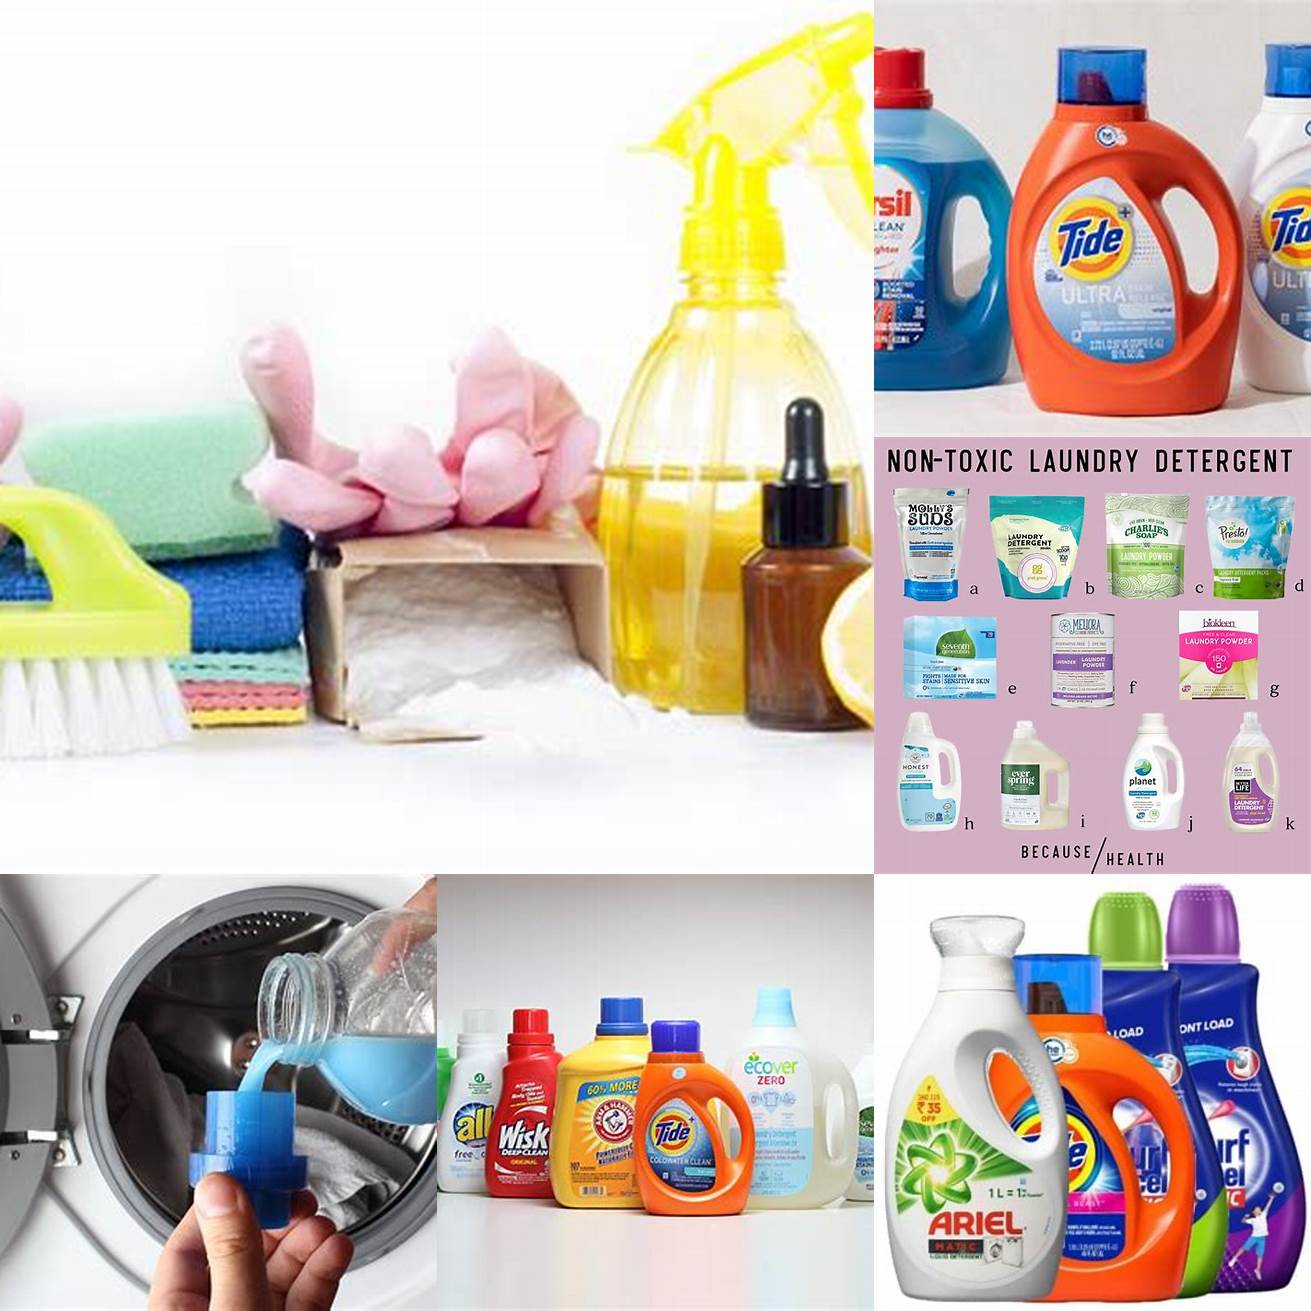 Avoid Harsh Detergents Avoid using harsh detergents or bleach which can damage the fabric